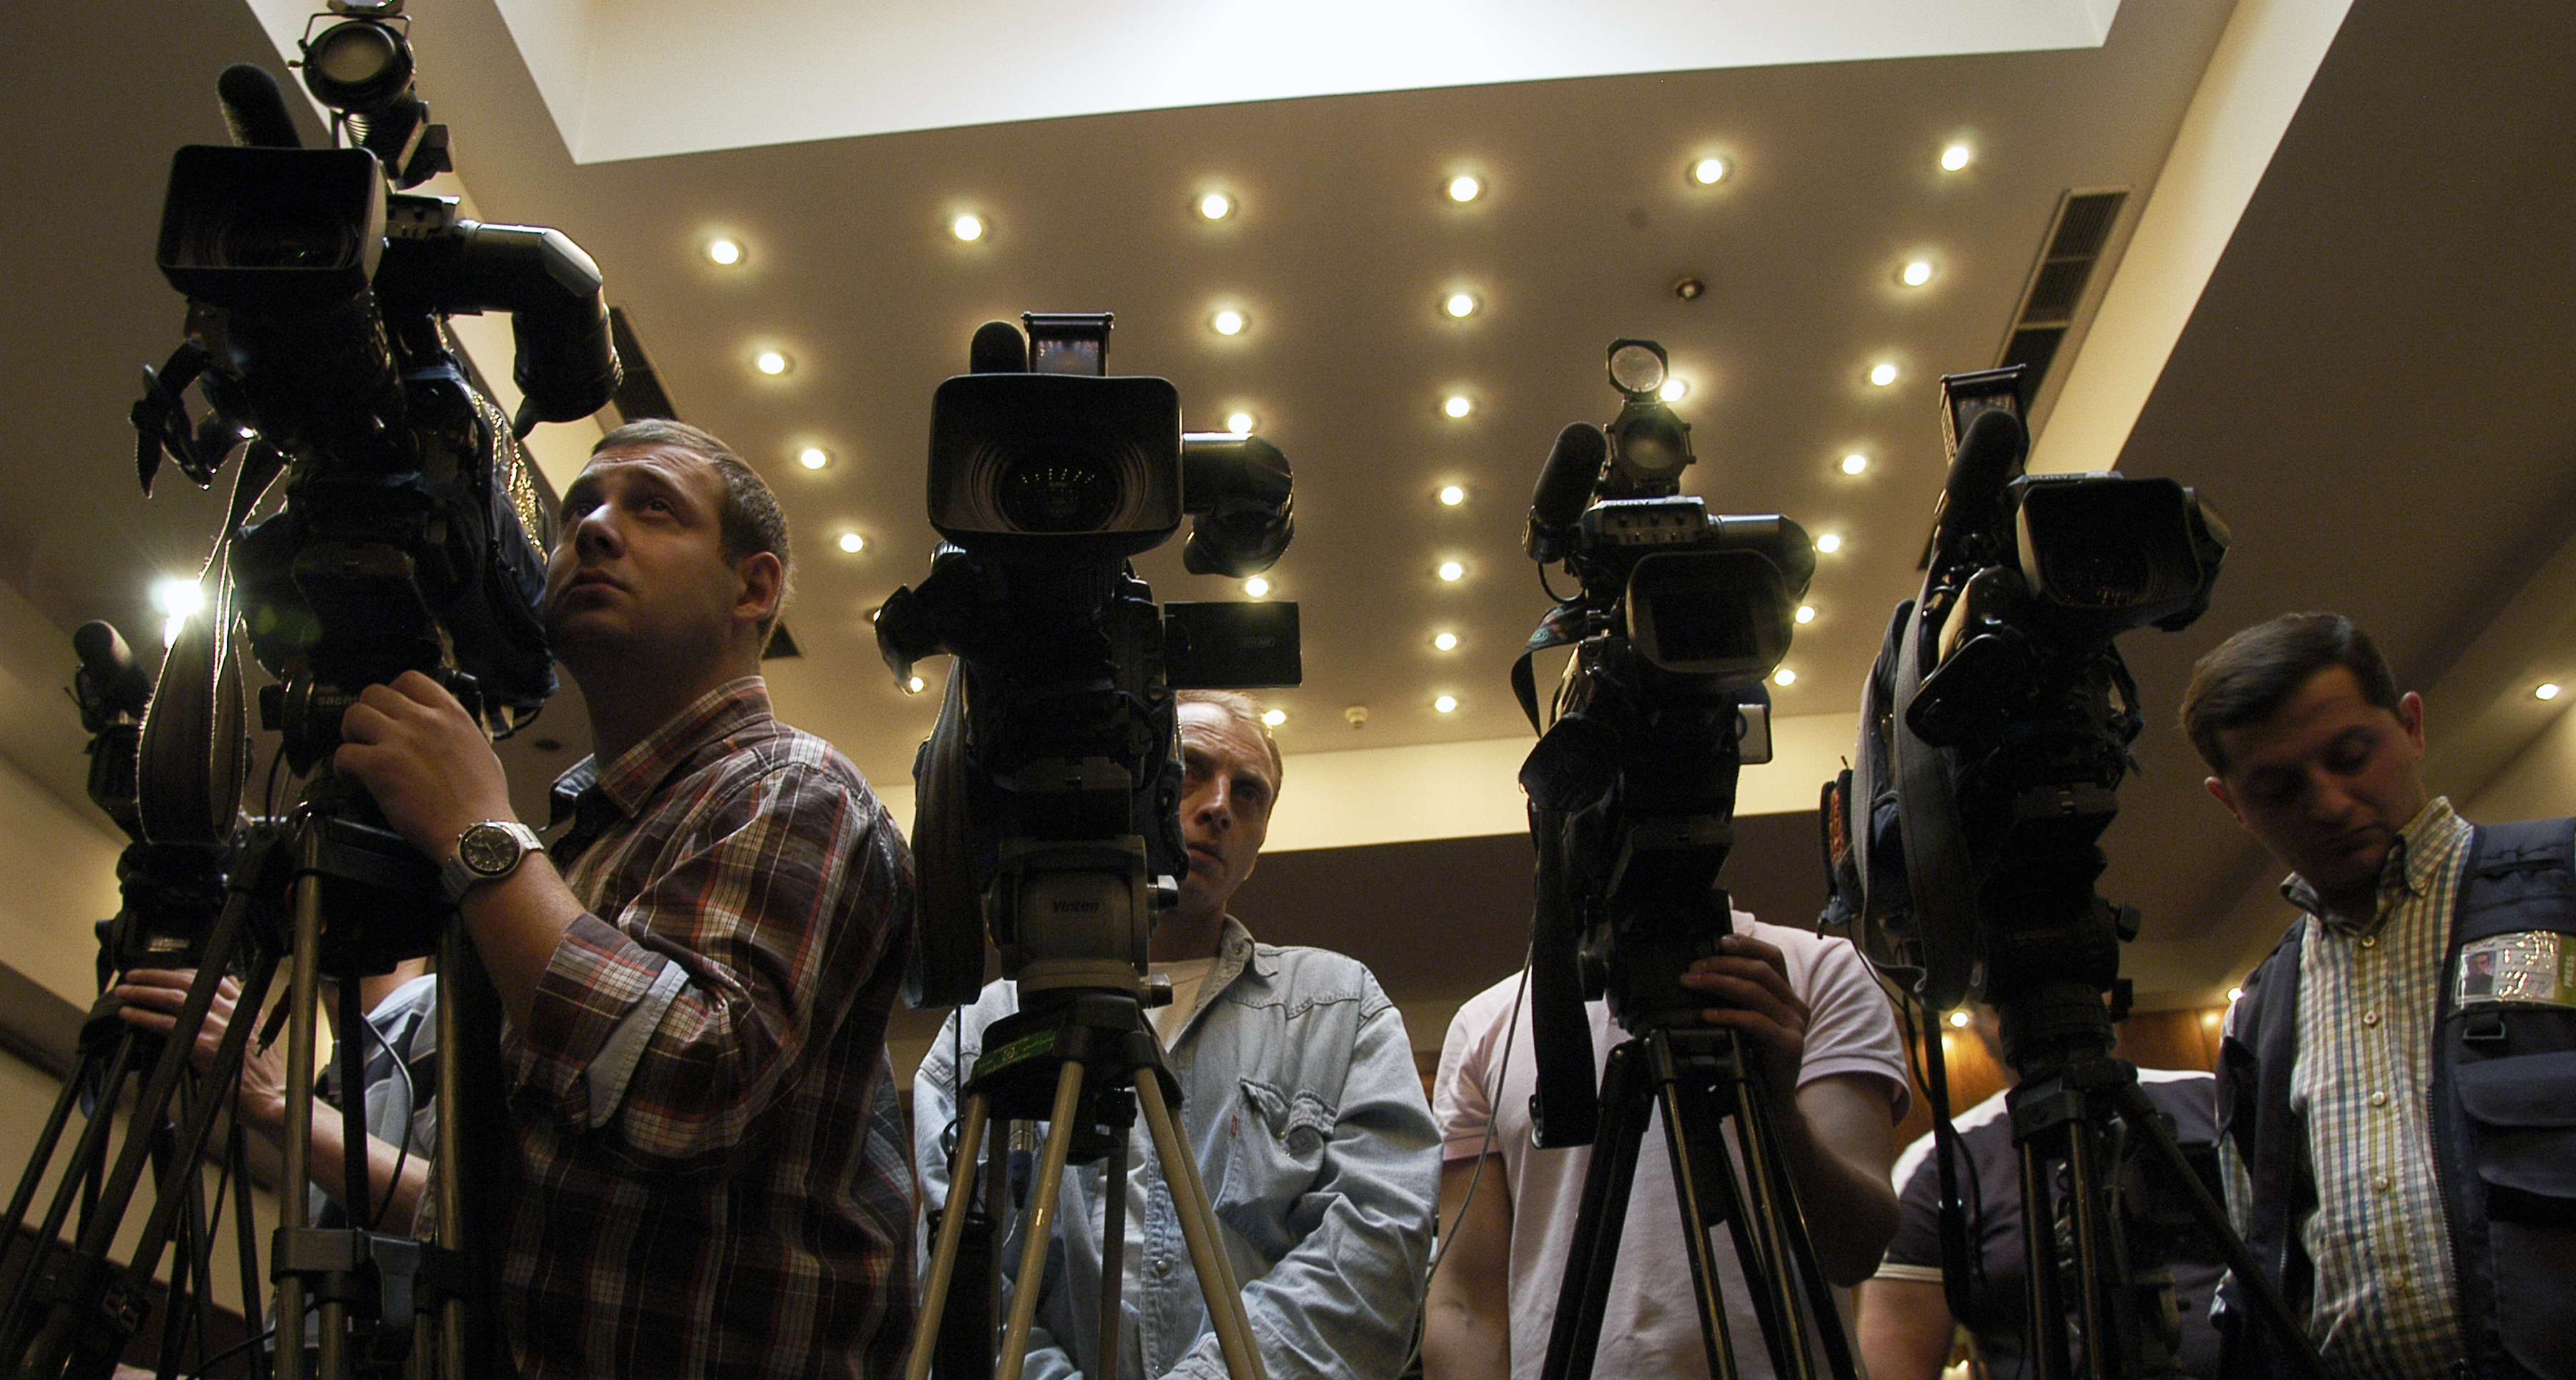 Camera_crews_at_the_joint_Press_Conference_given_by_the_Congress_and_the_ODIHR._Tbilisi,_2010.jpg